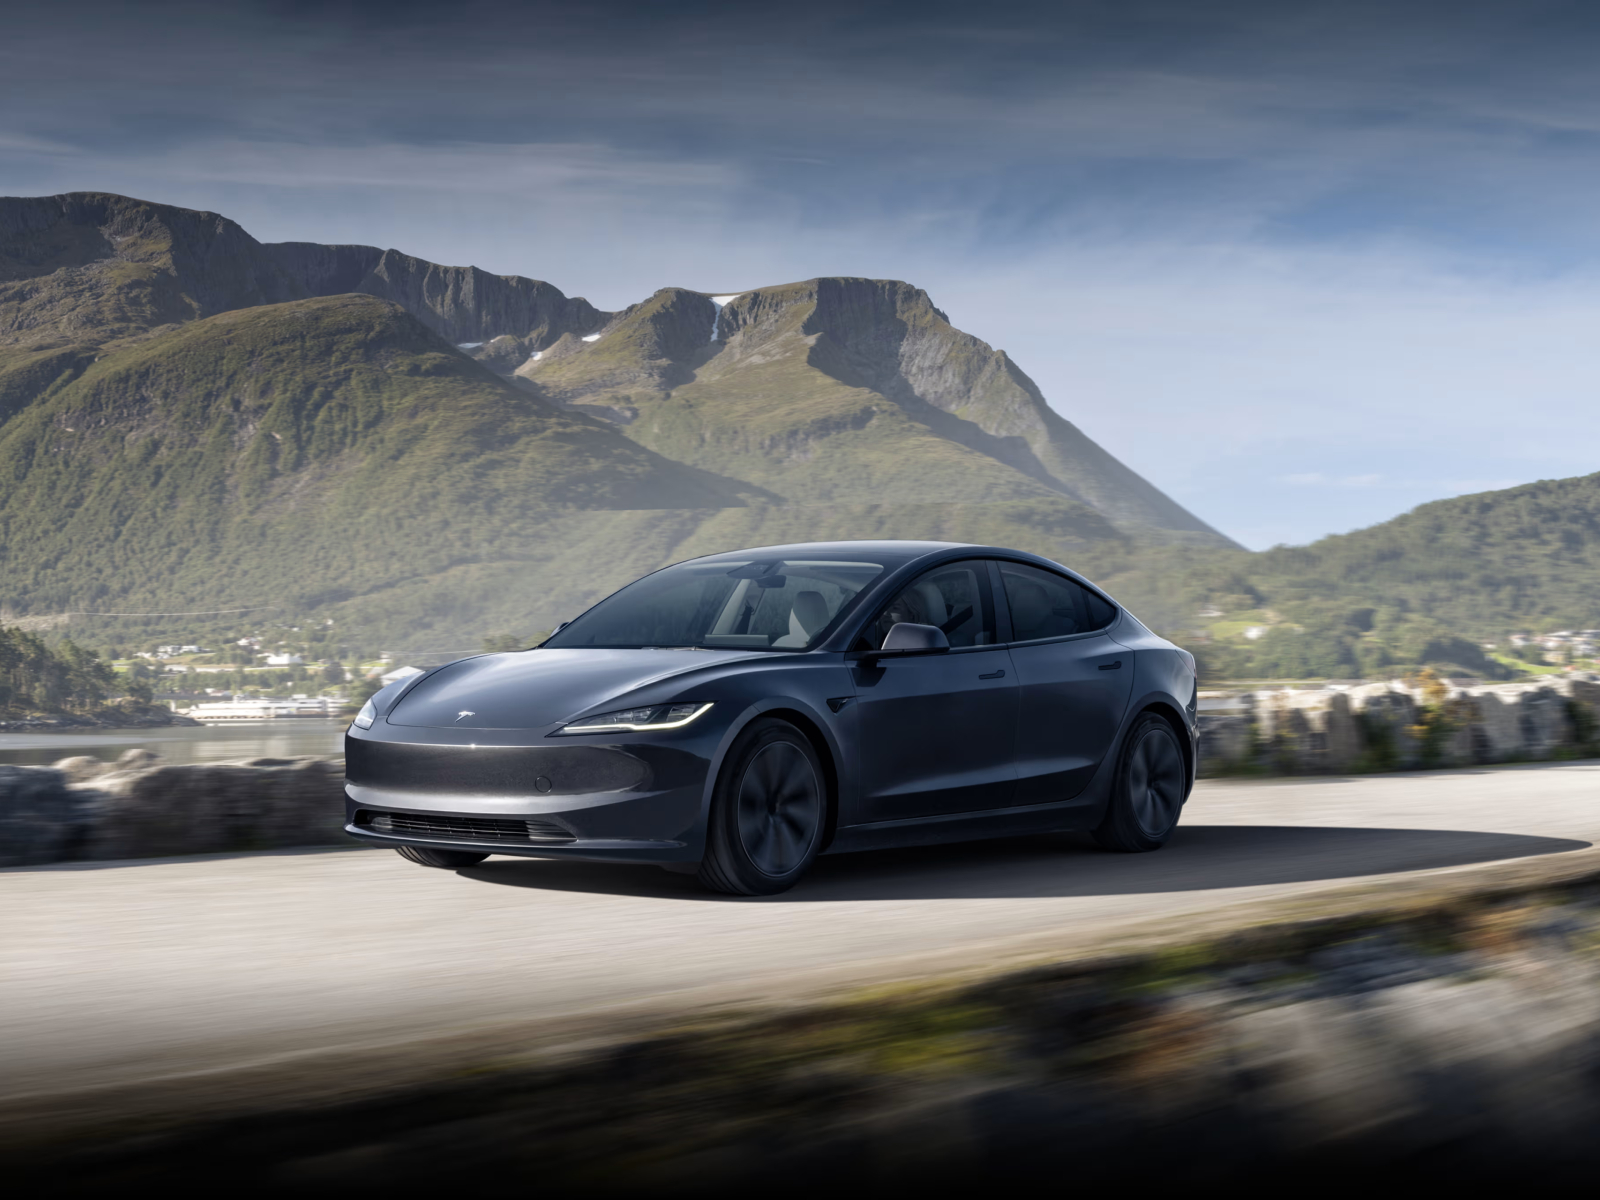 Tesla Model 3 refresh brings new colors, interior, and more - The